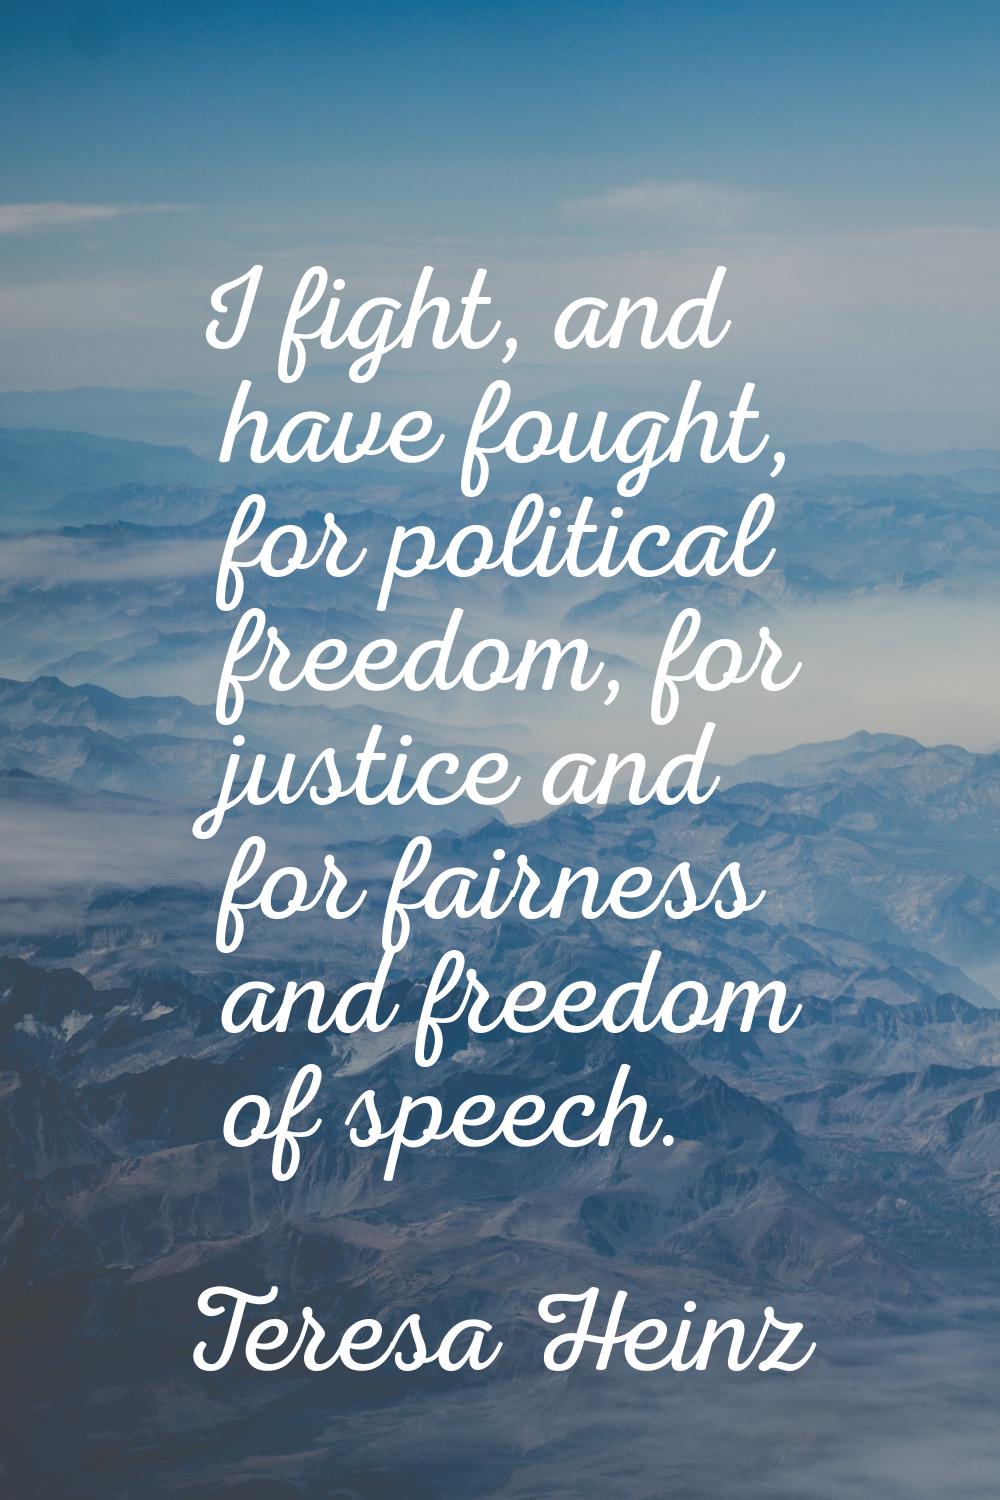 I fight, and have fought, for political freedom, for justice and for fairness and freedom of speech